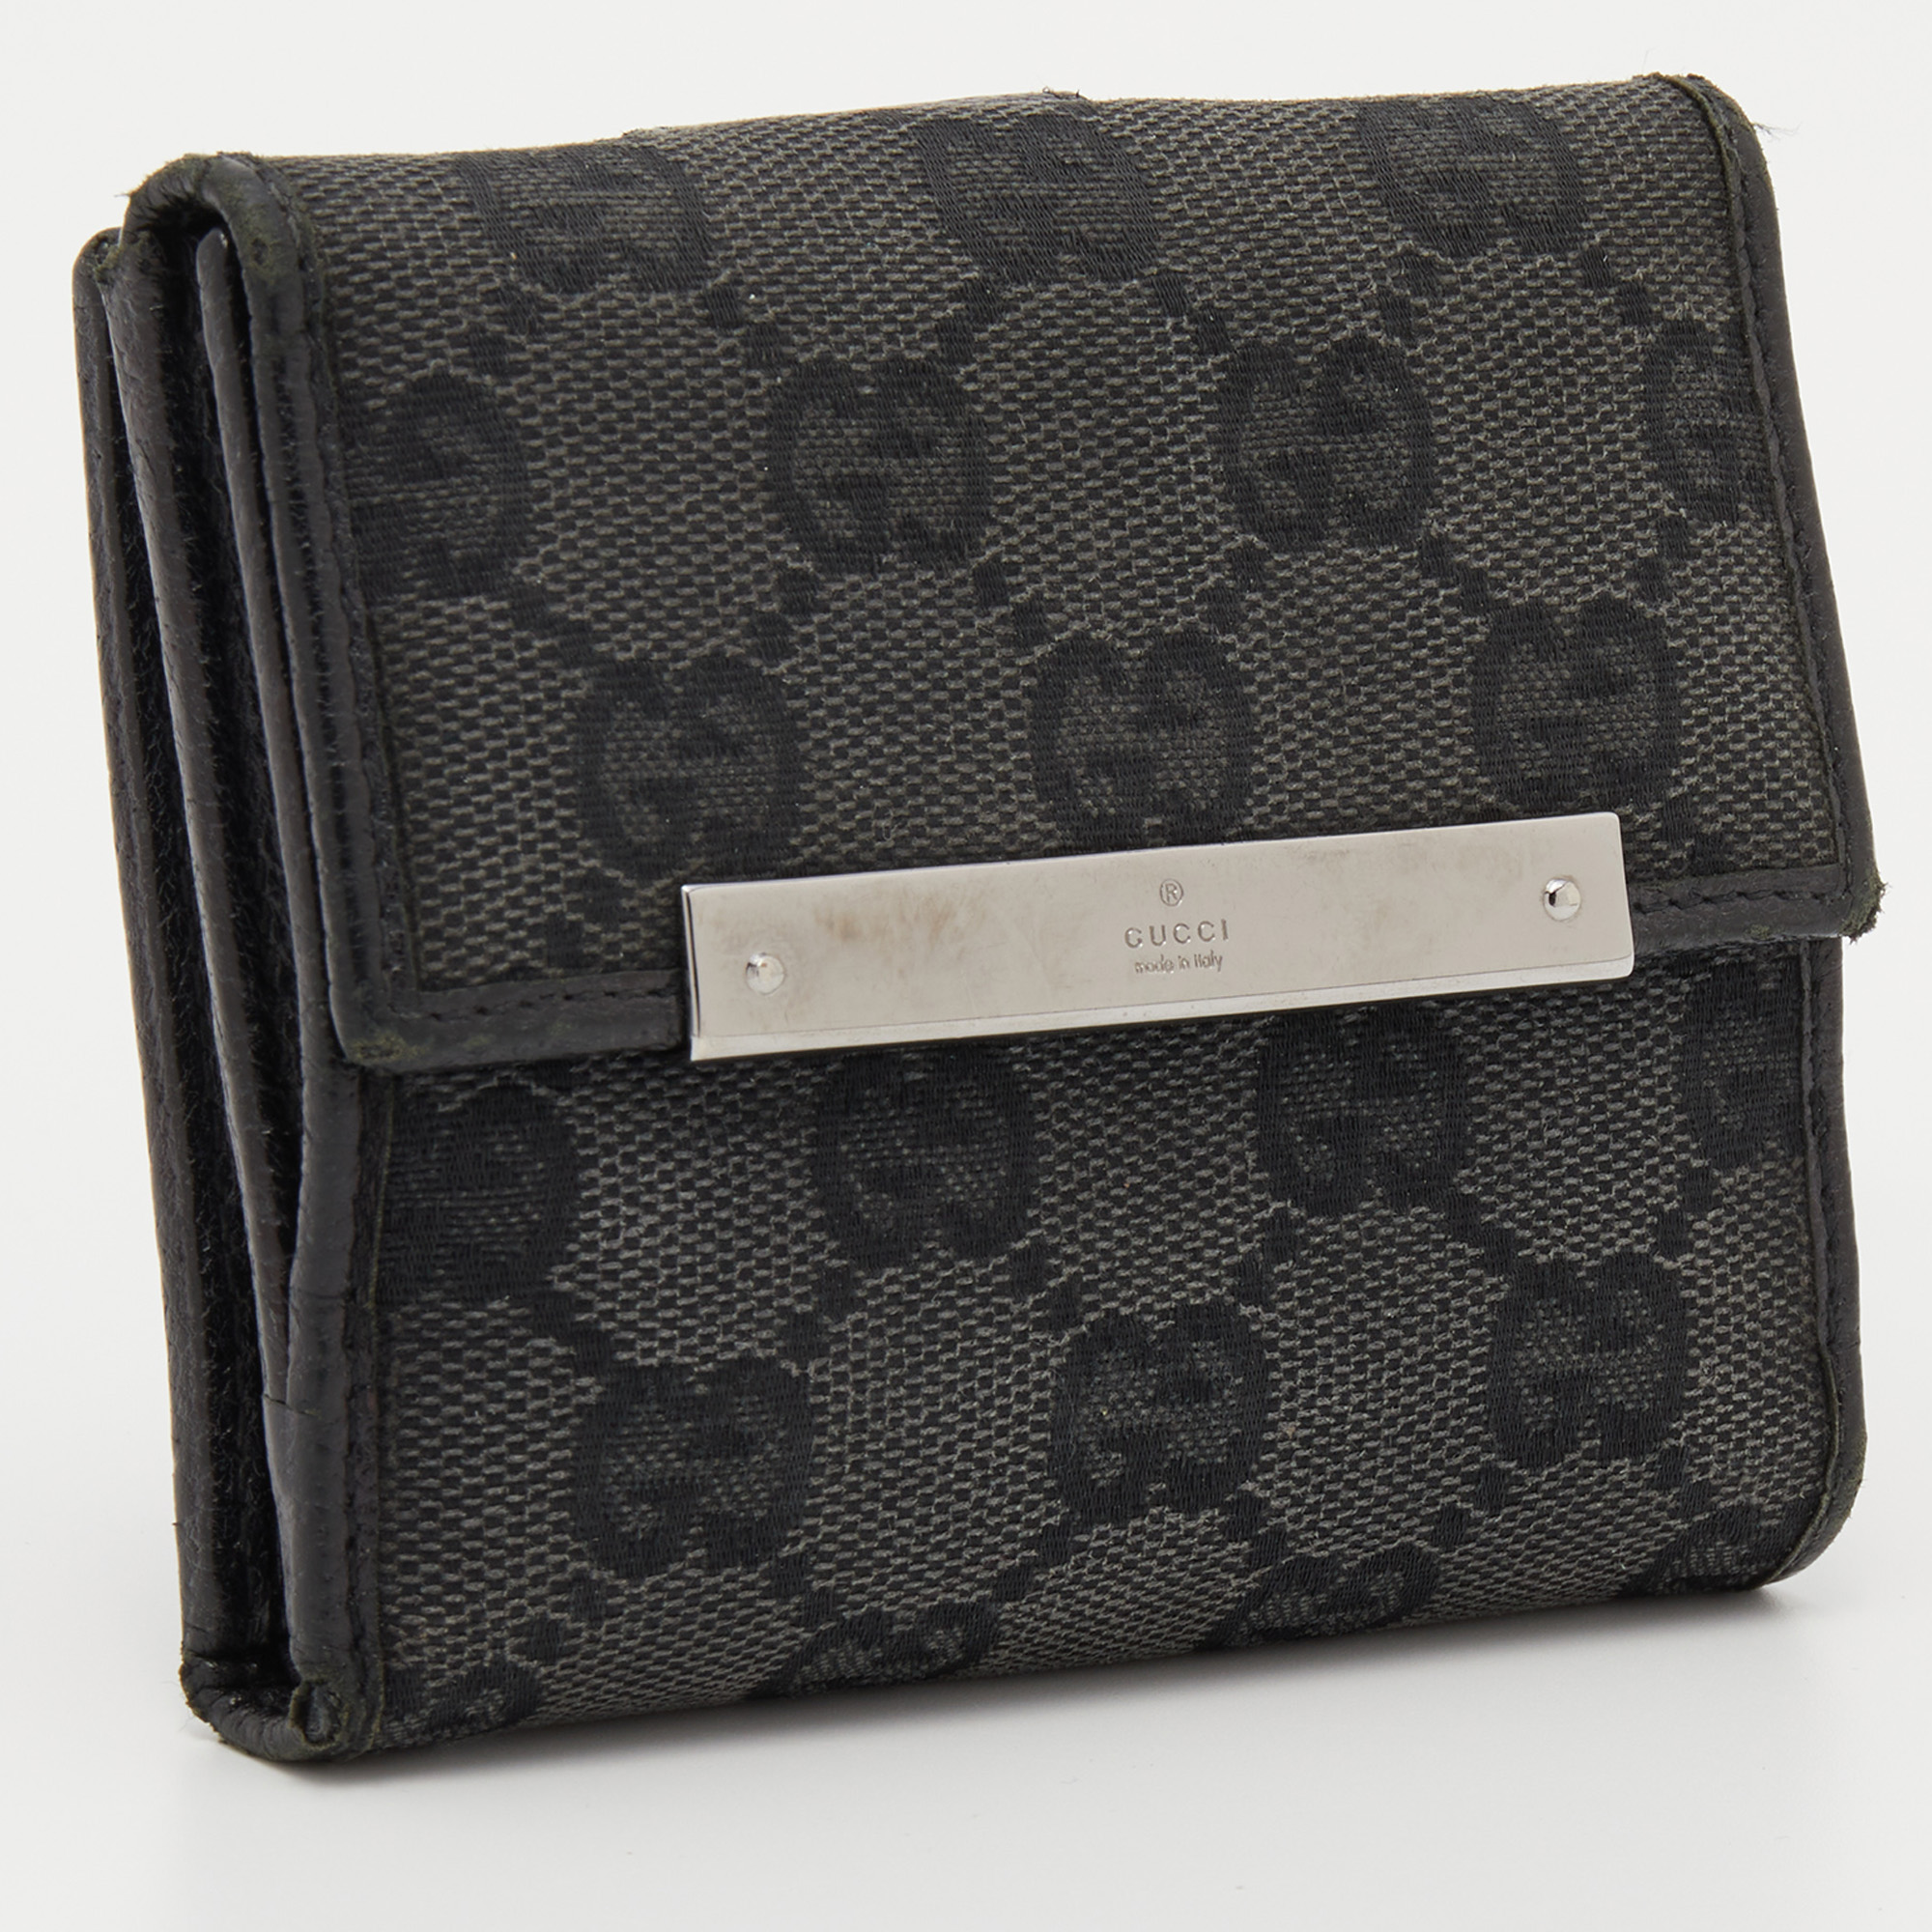 Gucci Black GG Canvas And Leather Flap Compact Wallet